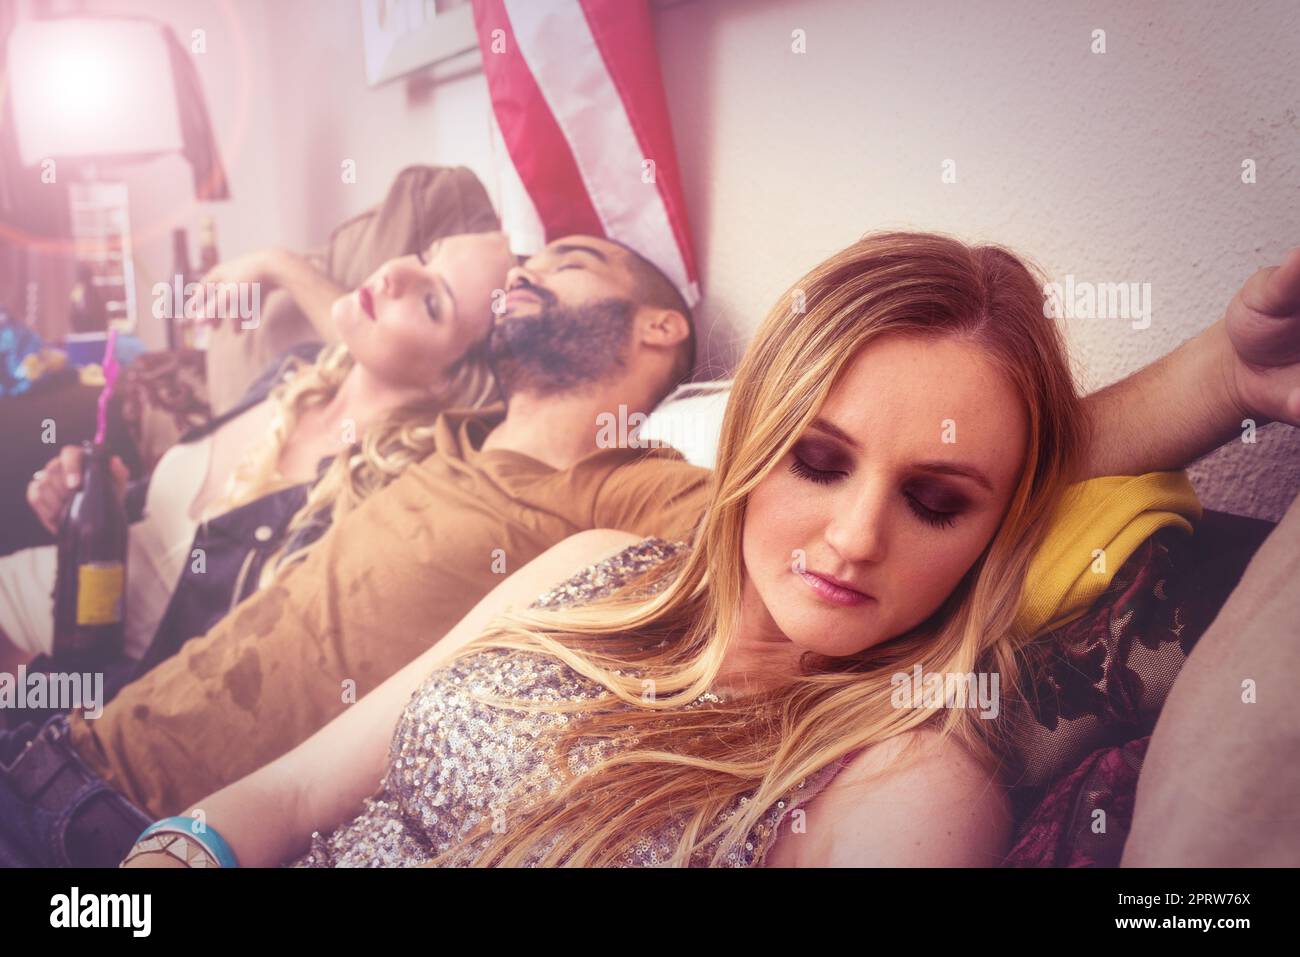 And then they passed out...Real party of guys and girls getting drunk. Stock Photo